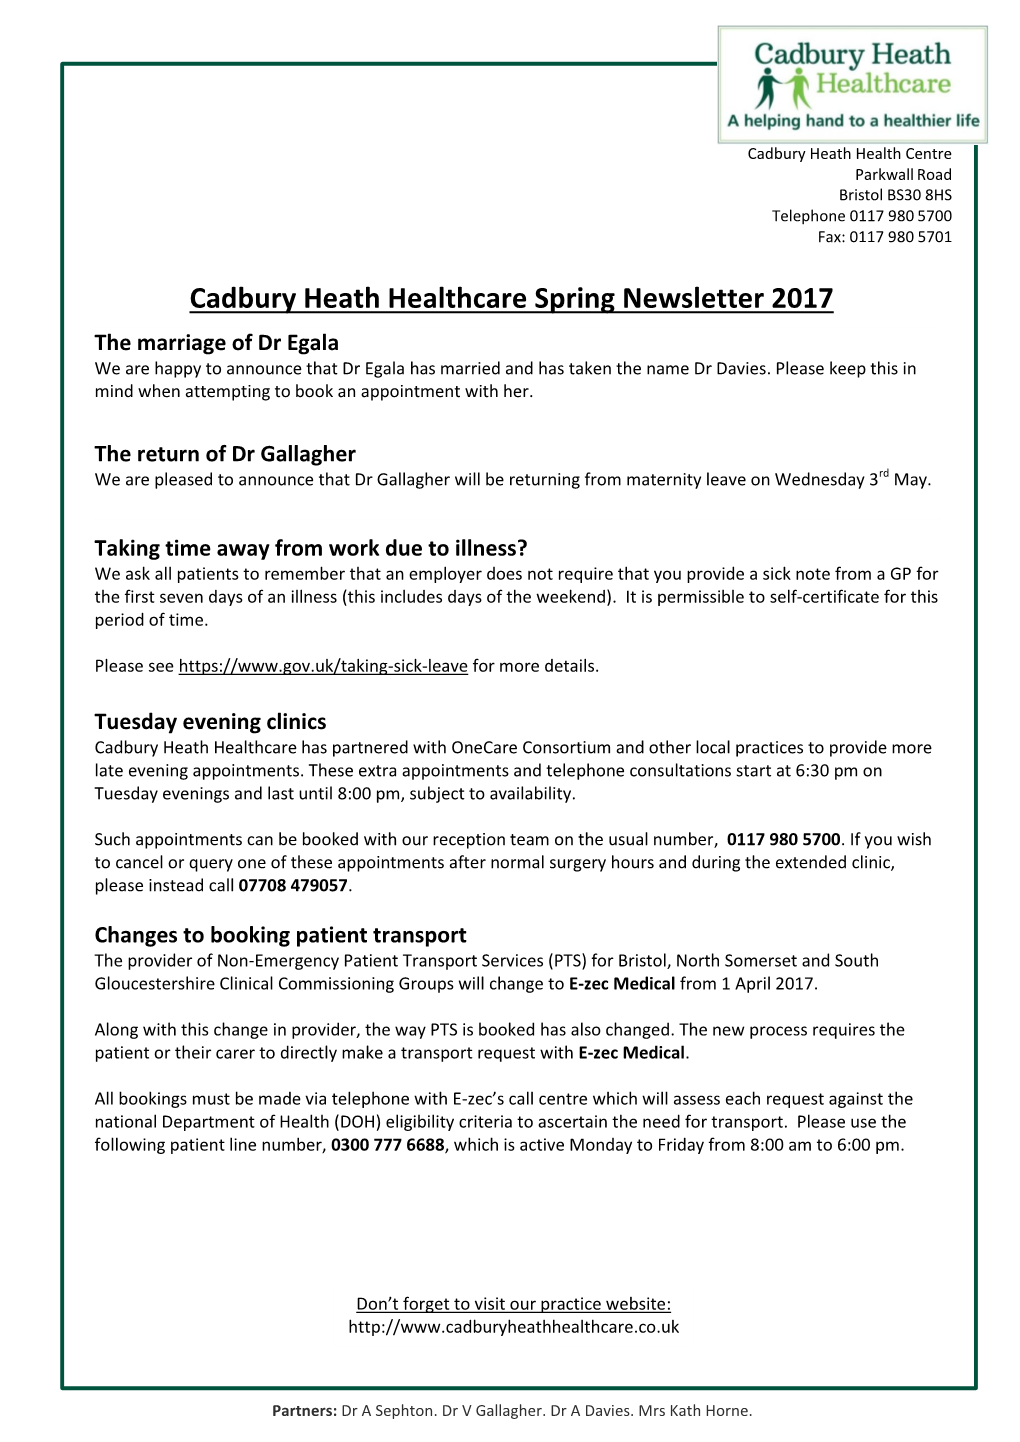 Cadbury Heath Healthcare Spring Newsletter 2017 the Marriage of Dr Egala We Are Happy to Announce That Dr Egala Has Married and Has Taken the Name Dr Davies